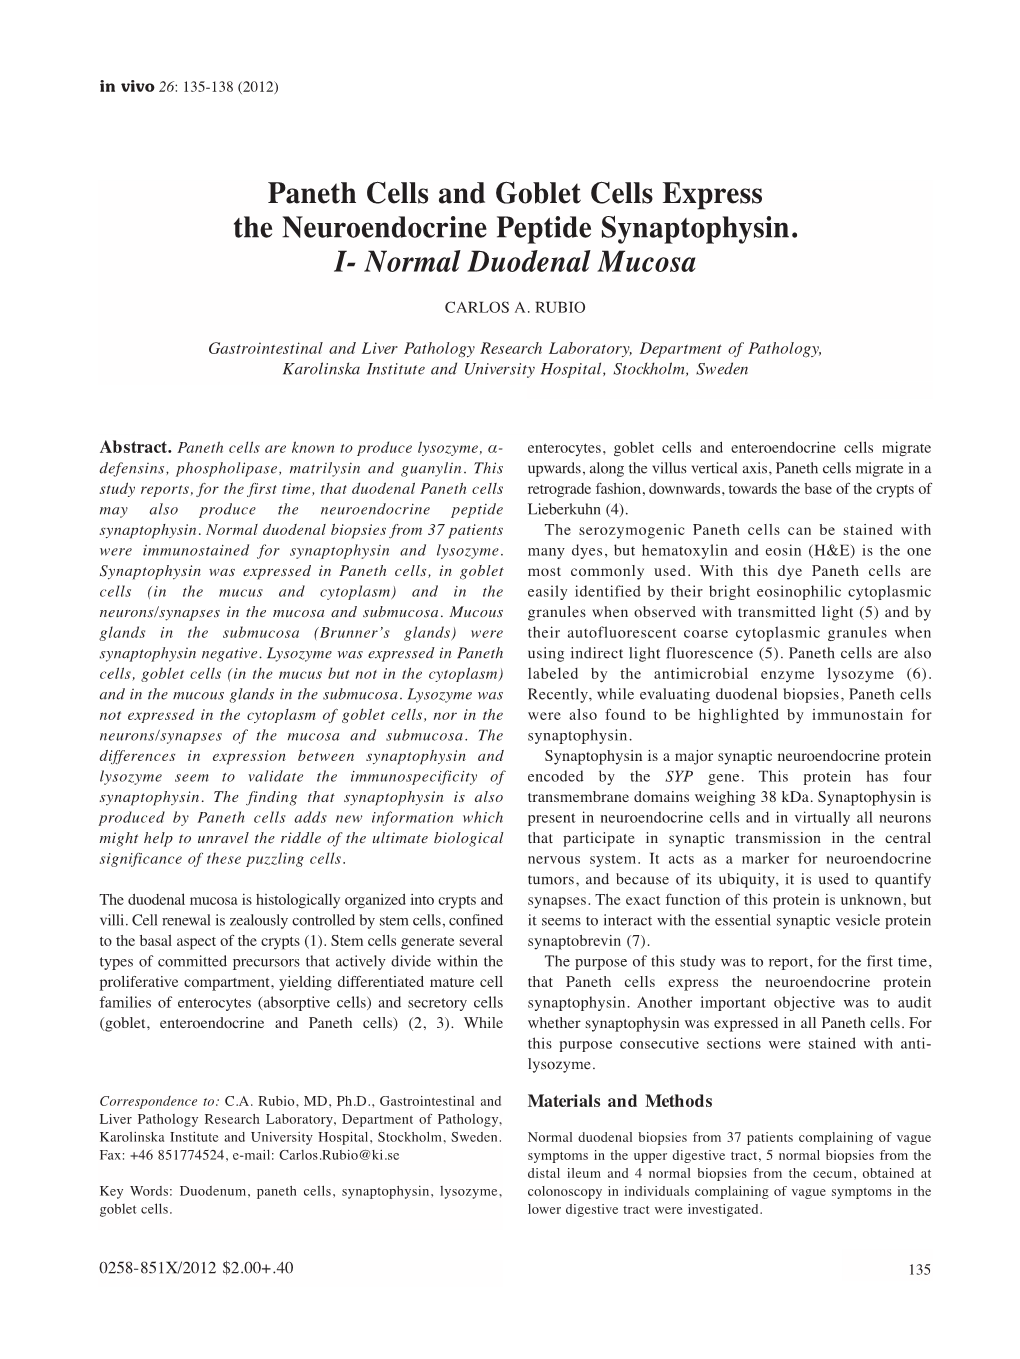 Paneth Cells and Goblet Cells Express the Neuroendocrine Peptide Synaptophysin